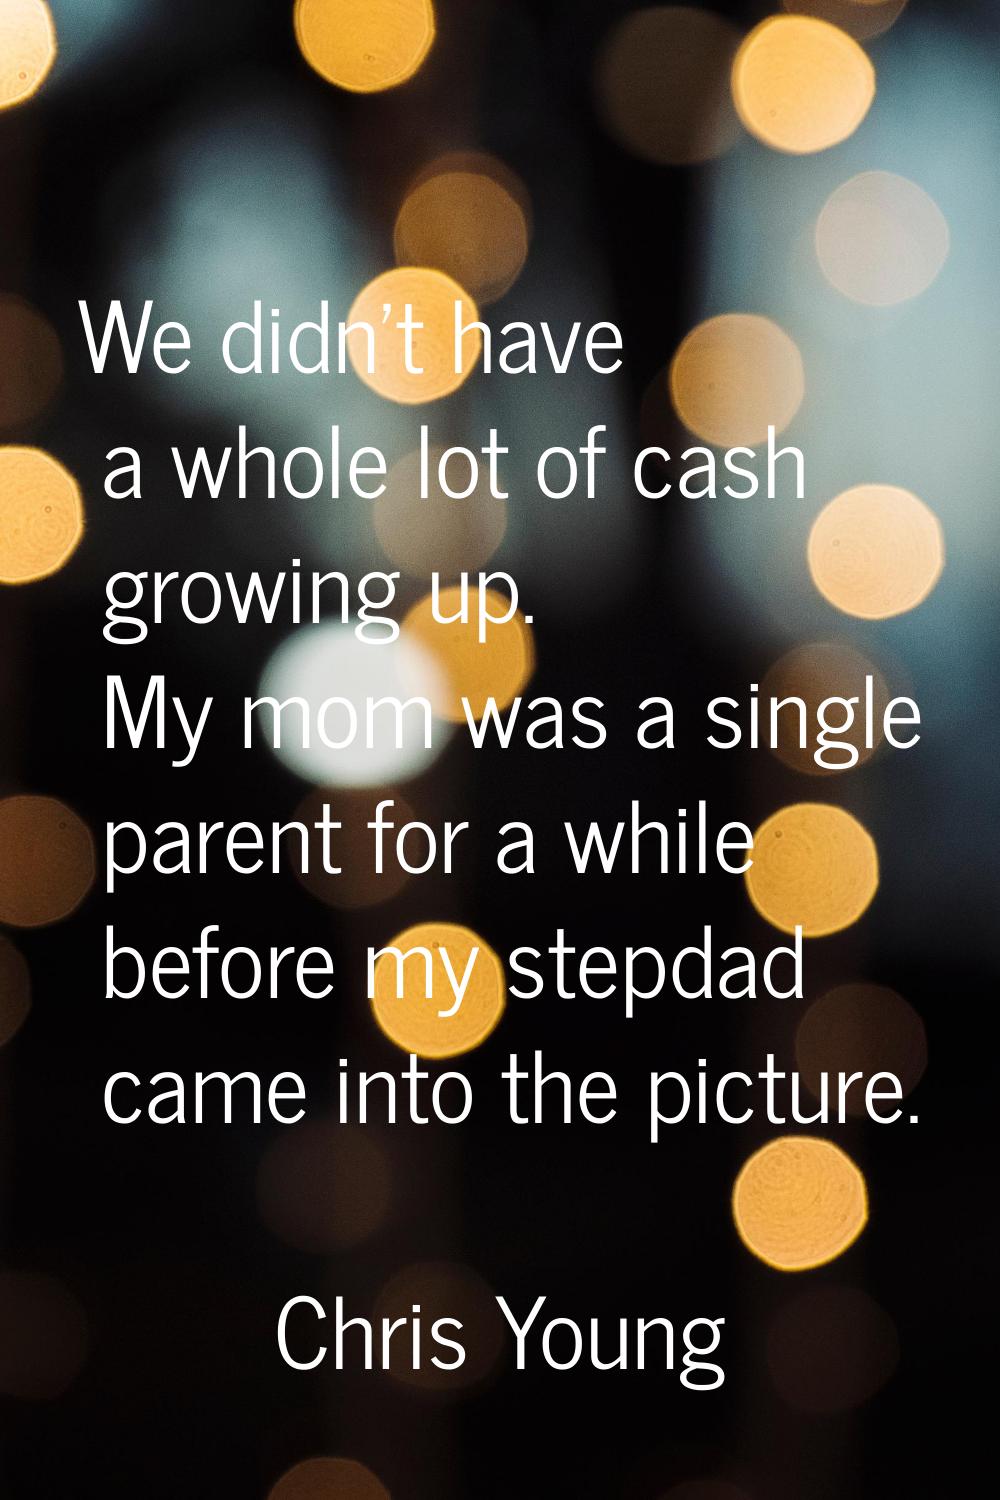 We didn't have a whole lot of cash growing up. My mom was a single parent for a while before my ste